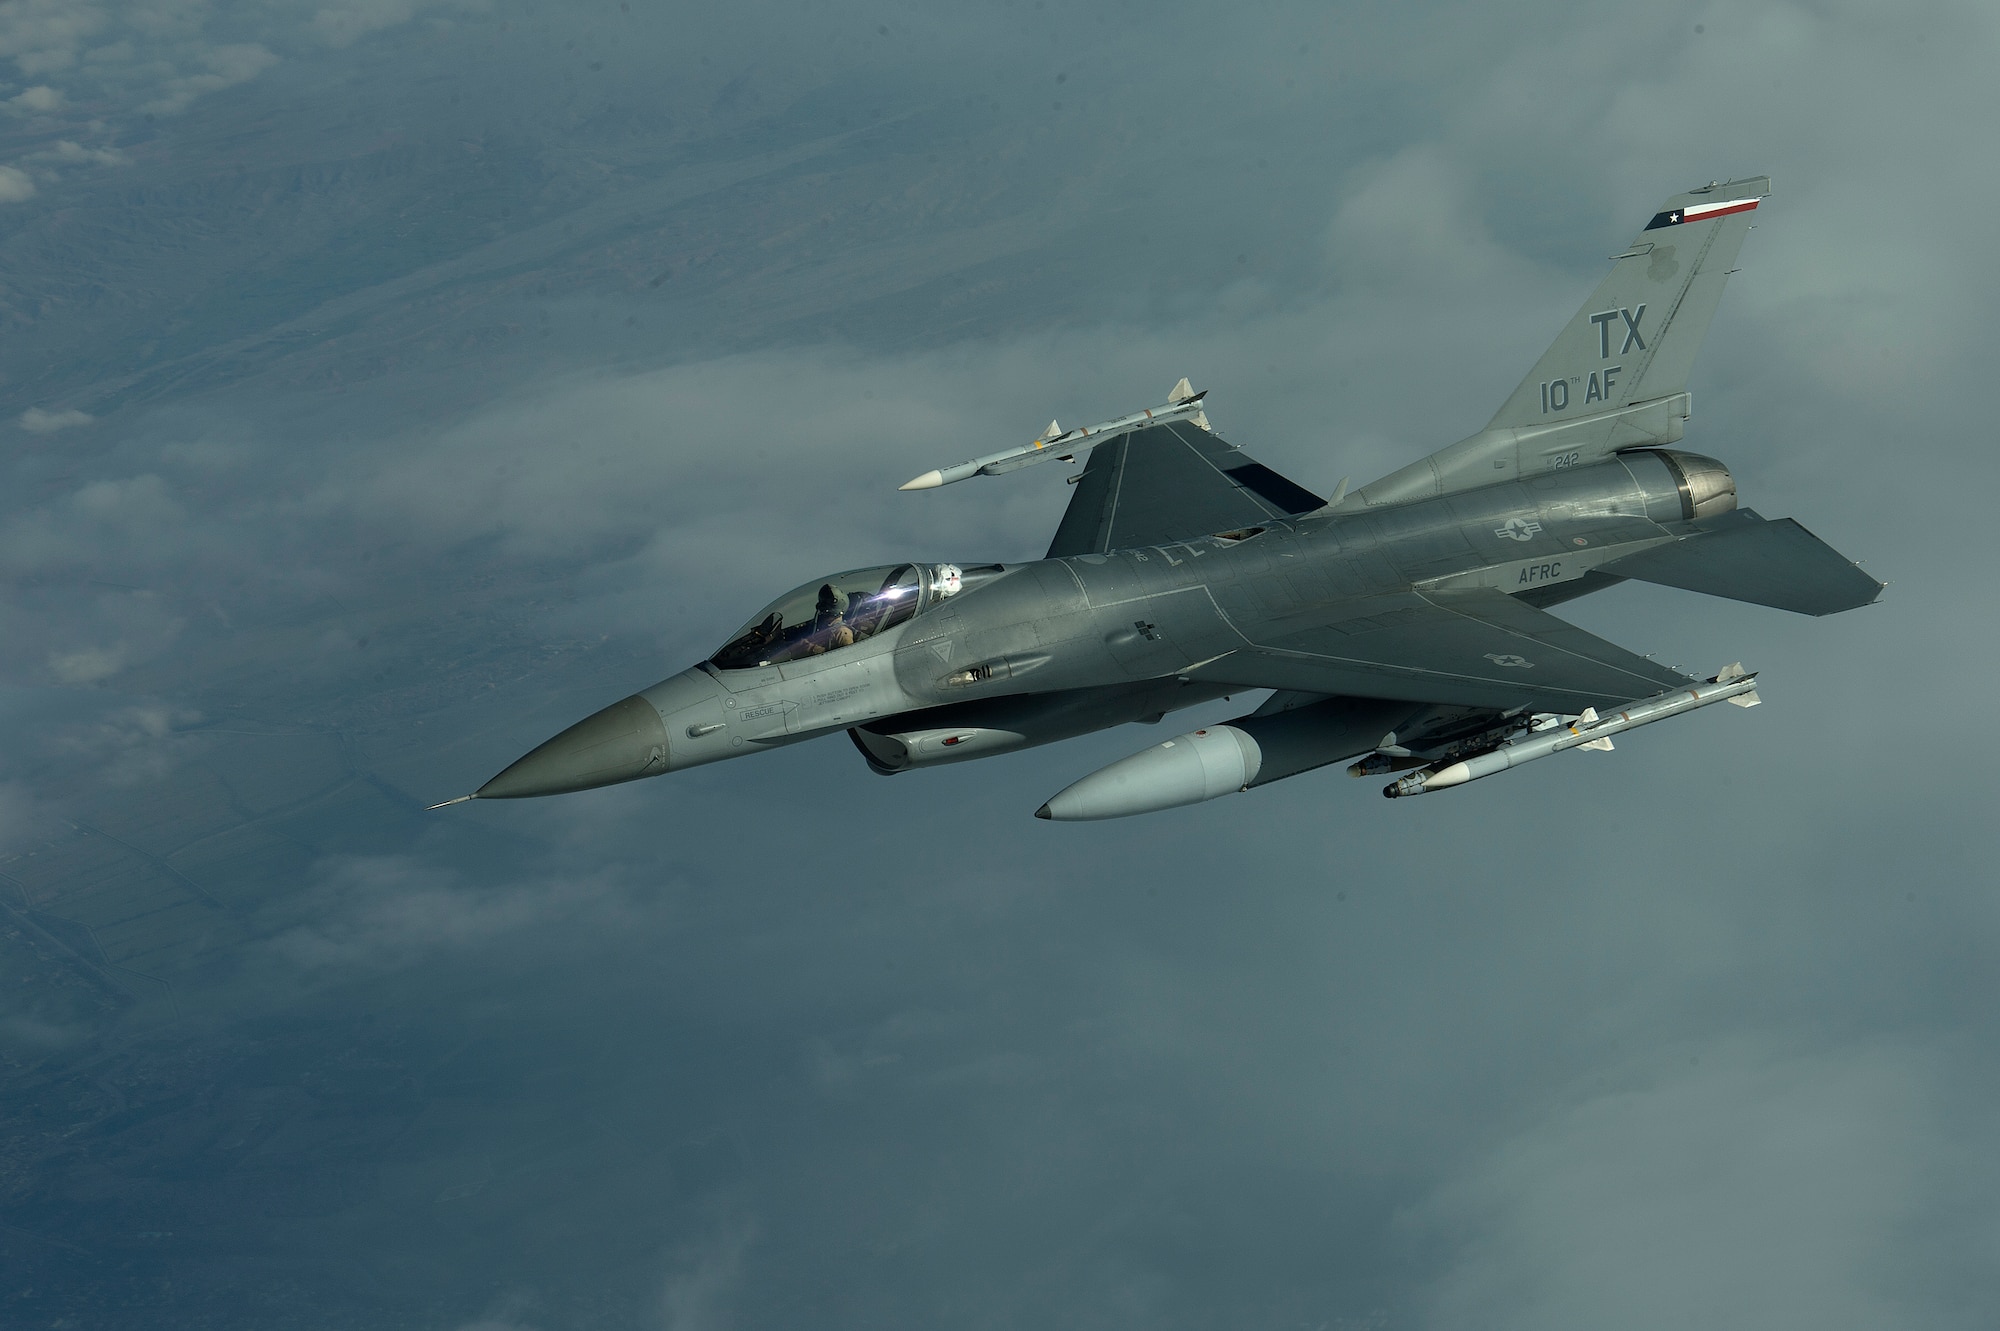 A U.S. Air Force F-16C Fighting Falcon from the 93rd Expeditionary Fighter Squadron, Bagram Air Field, Afghanistan, flies a combat sortie, April 2, 2014. The F-16C Fighting Falcon is a compact, multi-role fighter aircraft. It is highly maneuverable and has proven itself in air-to-air combat and air-to-surface attack. It provides a relatively low-cost, high-performance weapon system for the United States. During this sortie the F-16C provided close air support capabilities to Operation Enduring Freedom coalition ground troops. (U.S. Air Force photo by Tech. Sgt. Jason Robertson/Released)